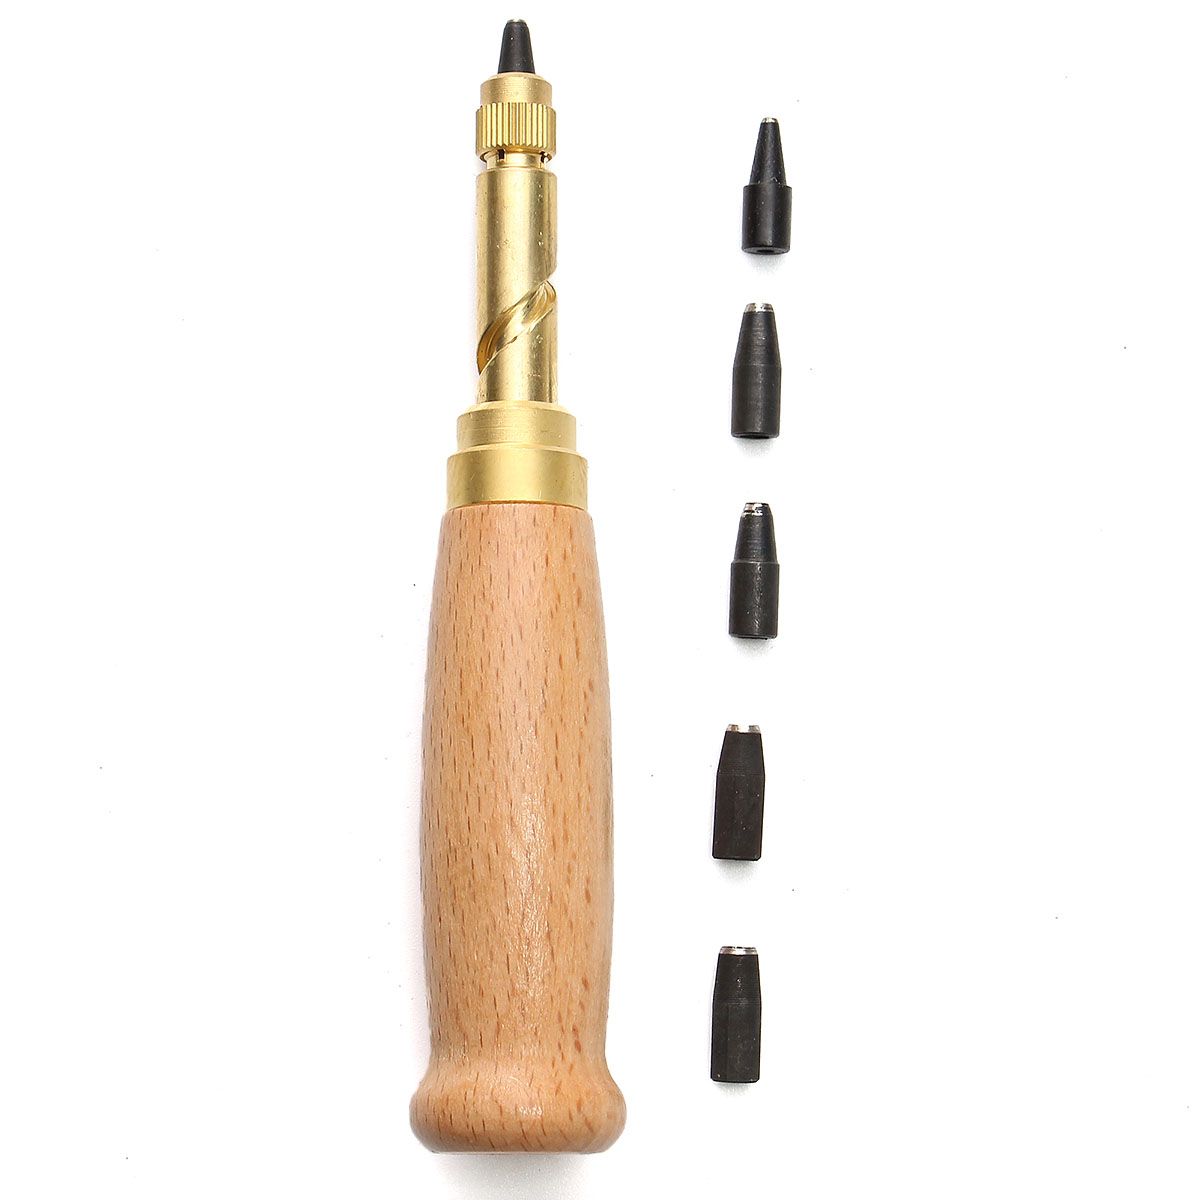 37Pcs-Leather-Craft-Tool-Kit-Hand-Sewing-Stitching-Punch-Saddle-Carving-Work-1334322